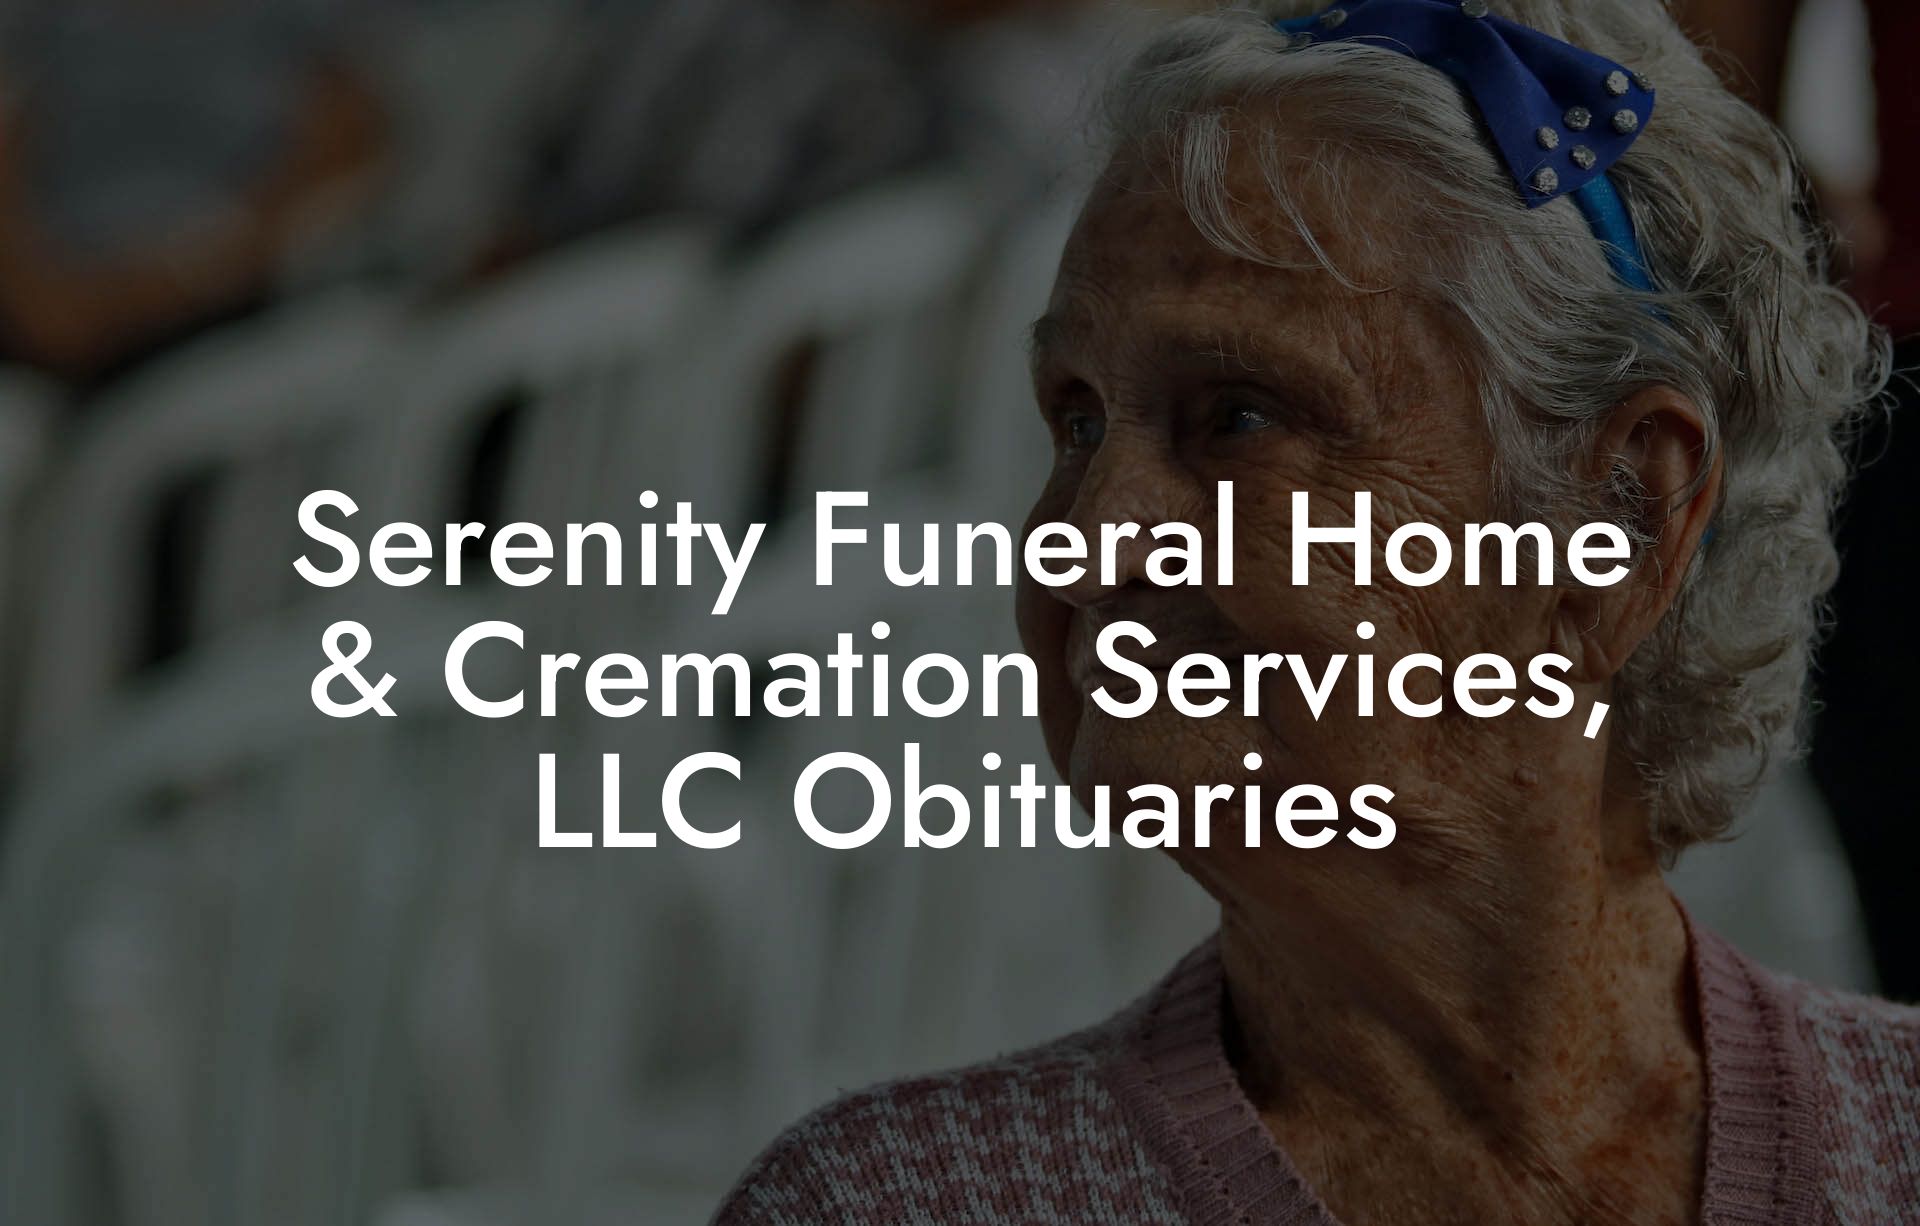 Serenity Funeral Home & Cremation Services, LLC Obituaries